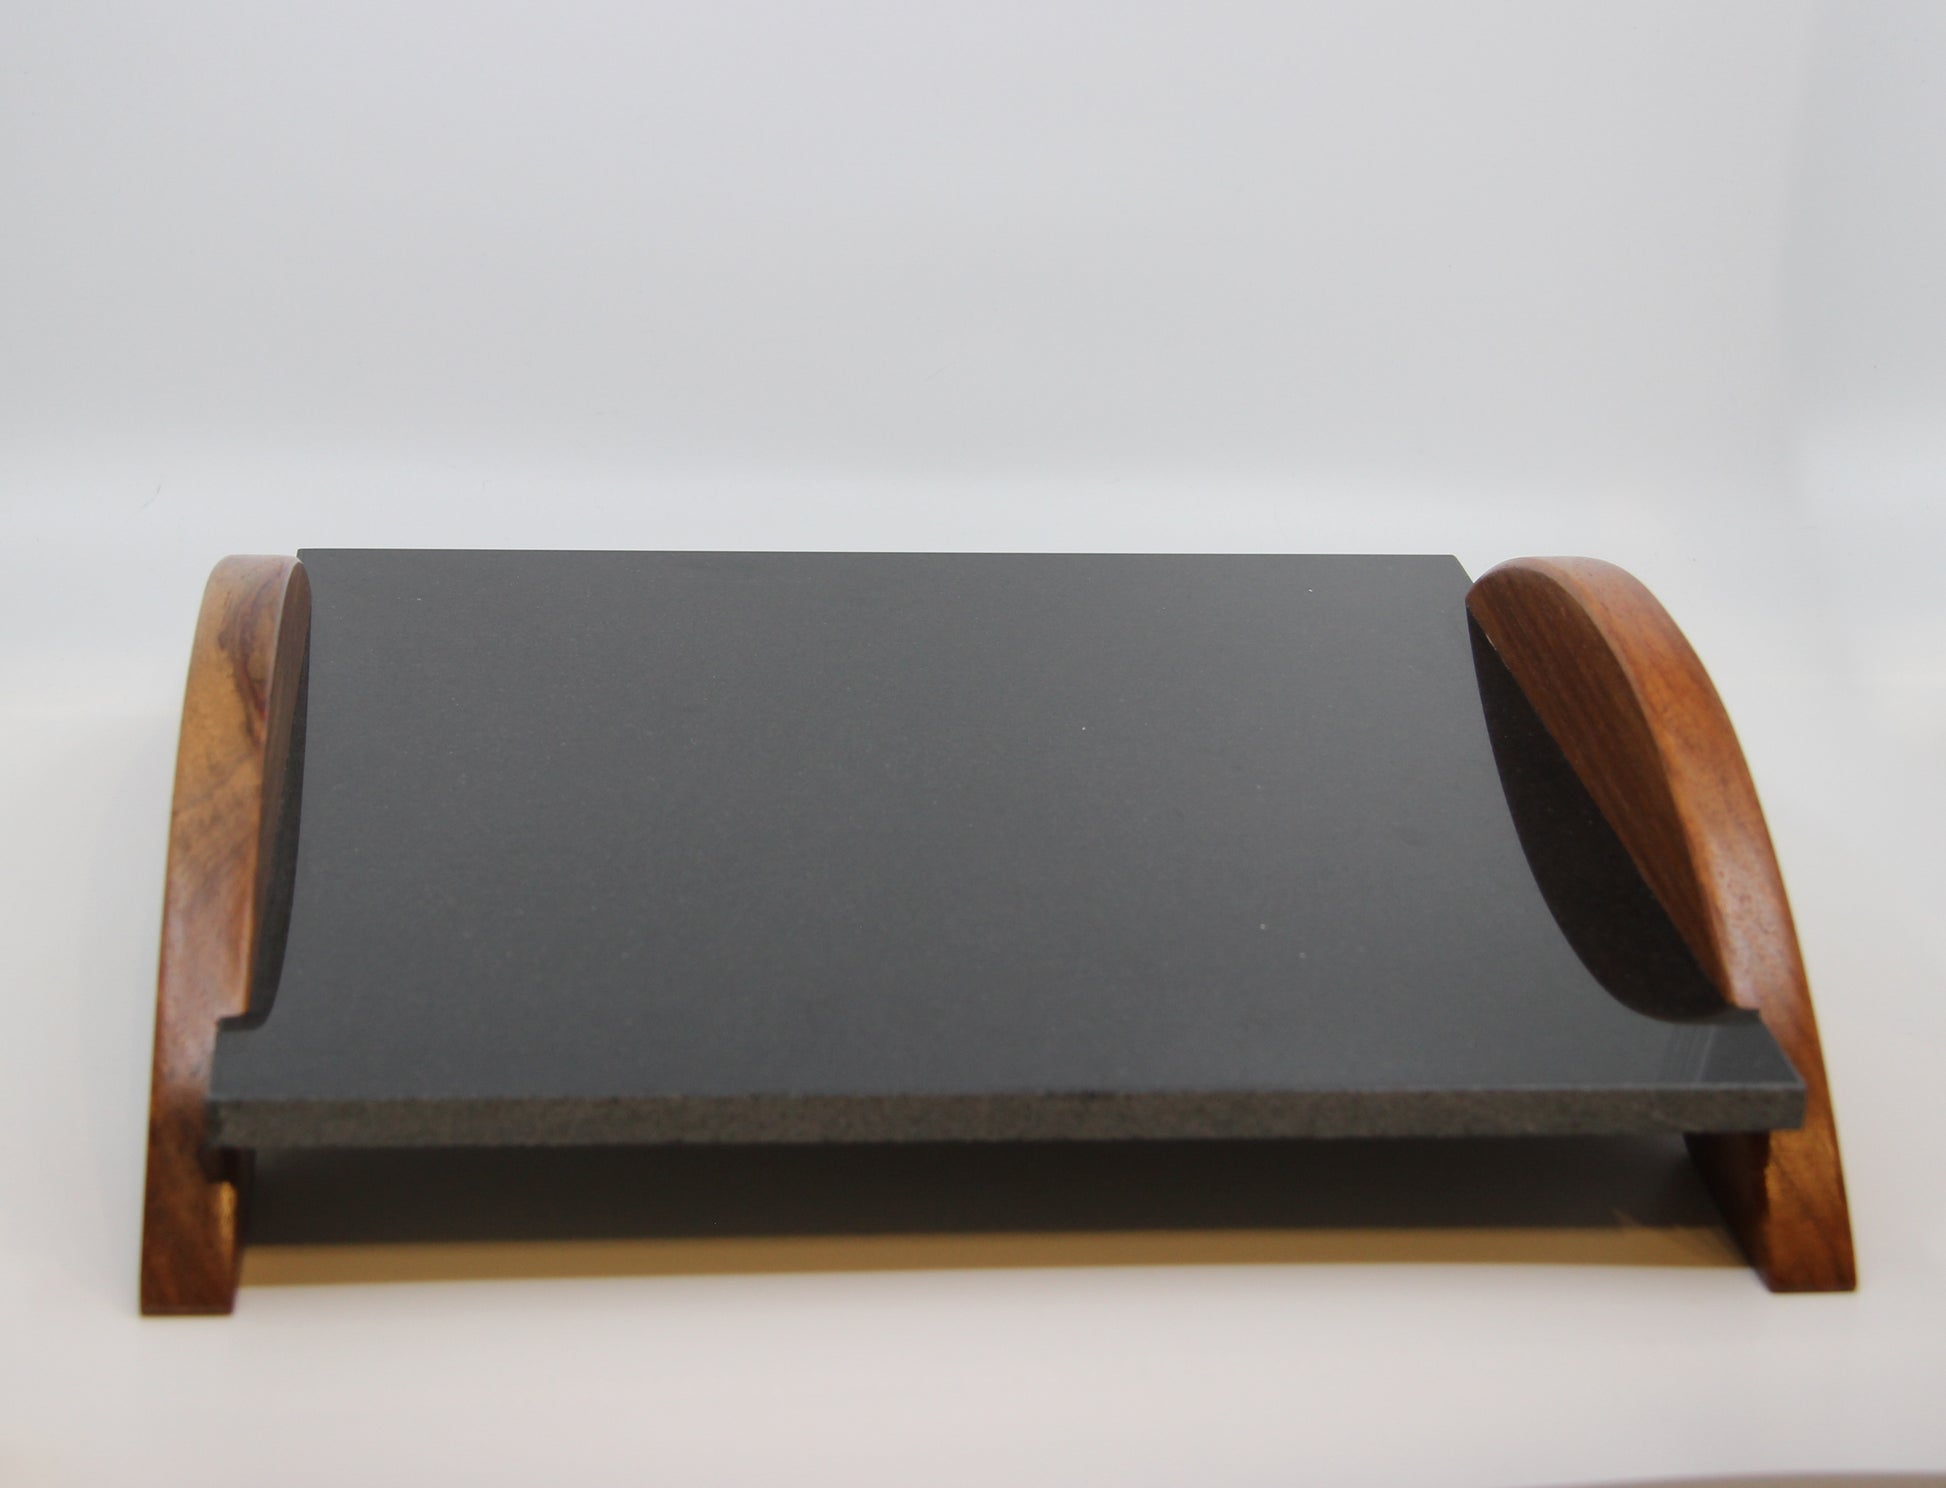 Shiny black stone serving tray with wood handles